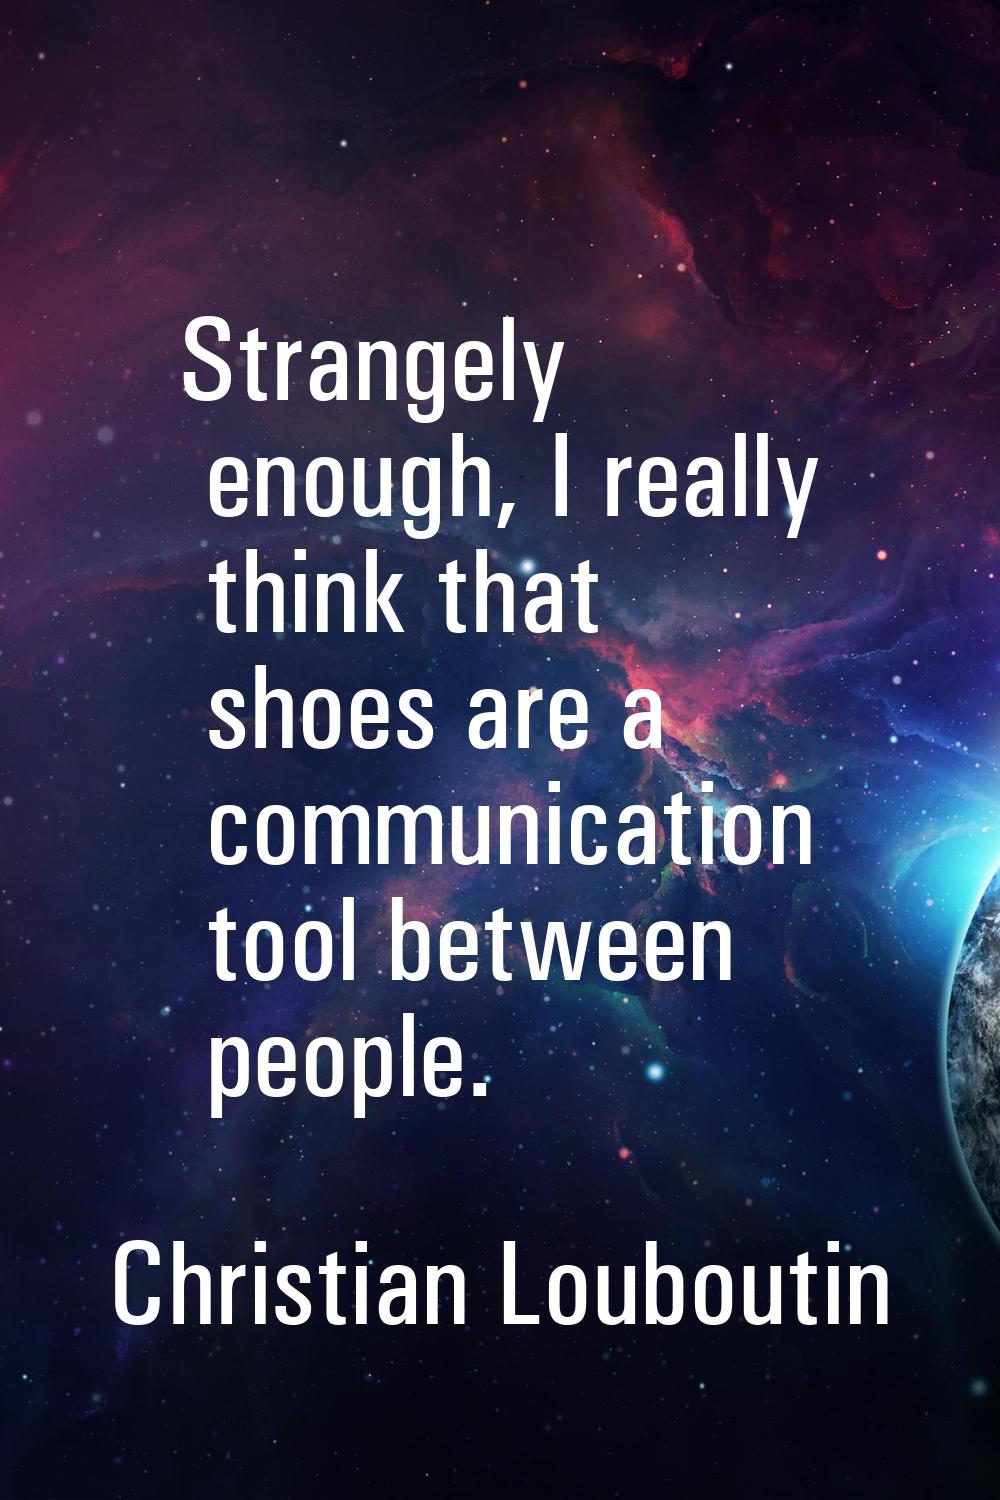 Strangely enough, I really think that shoes are a communication tool between people.